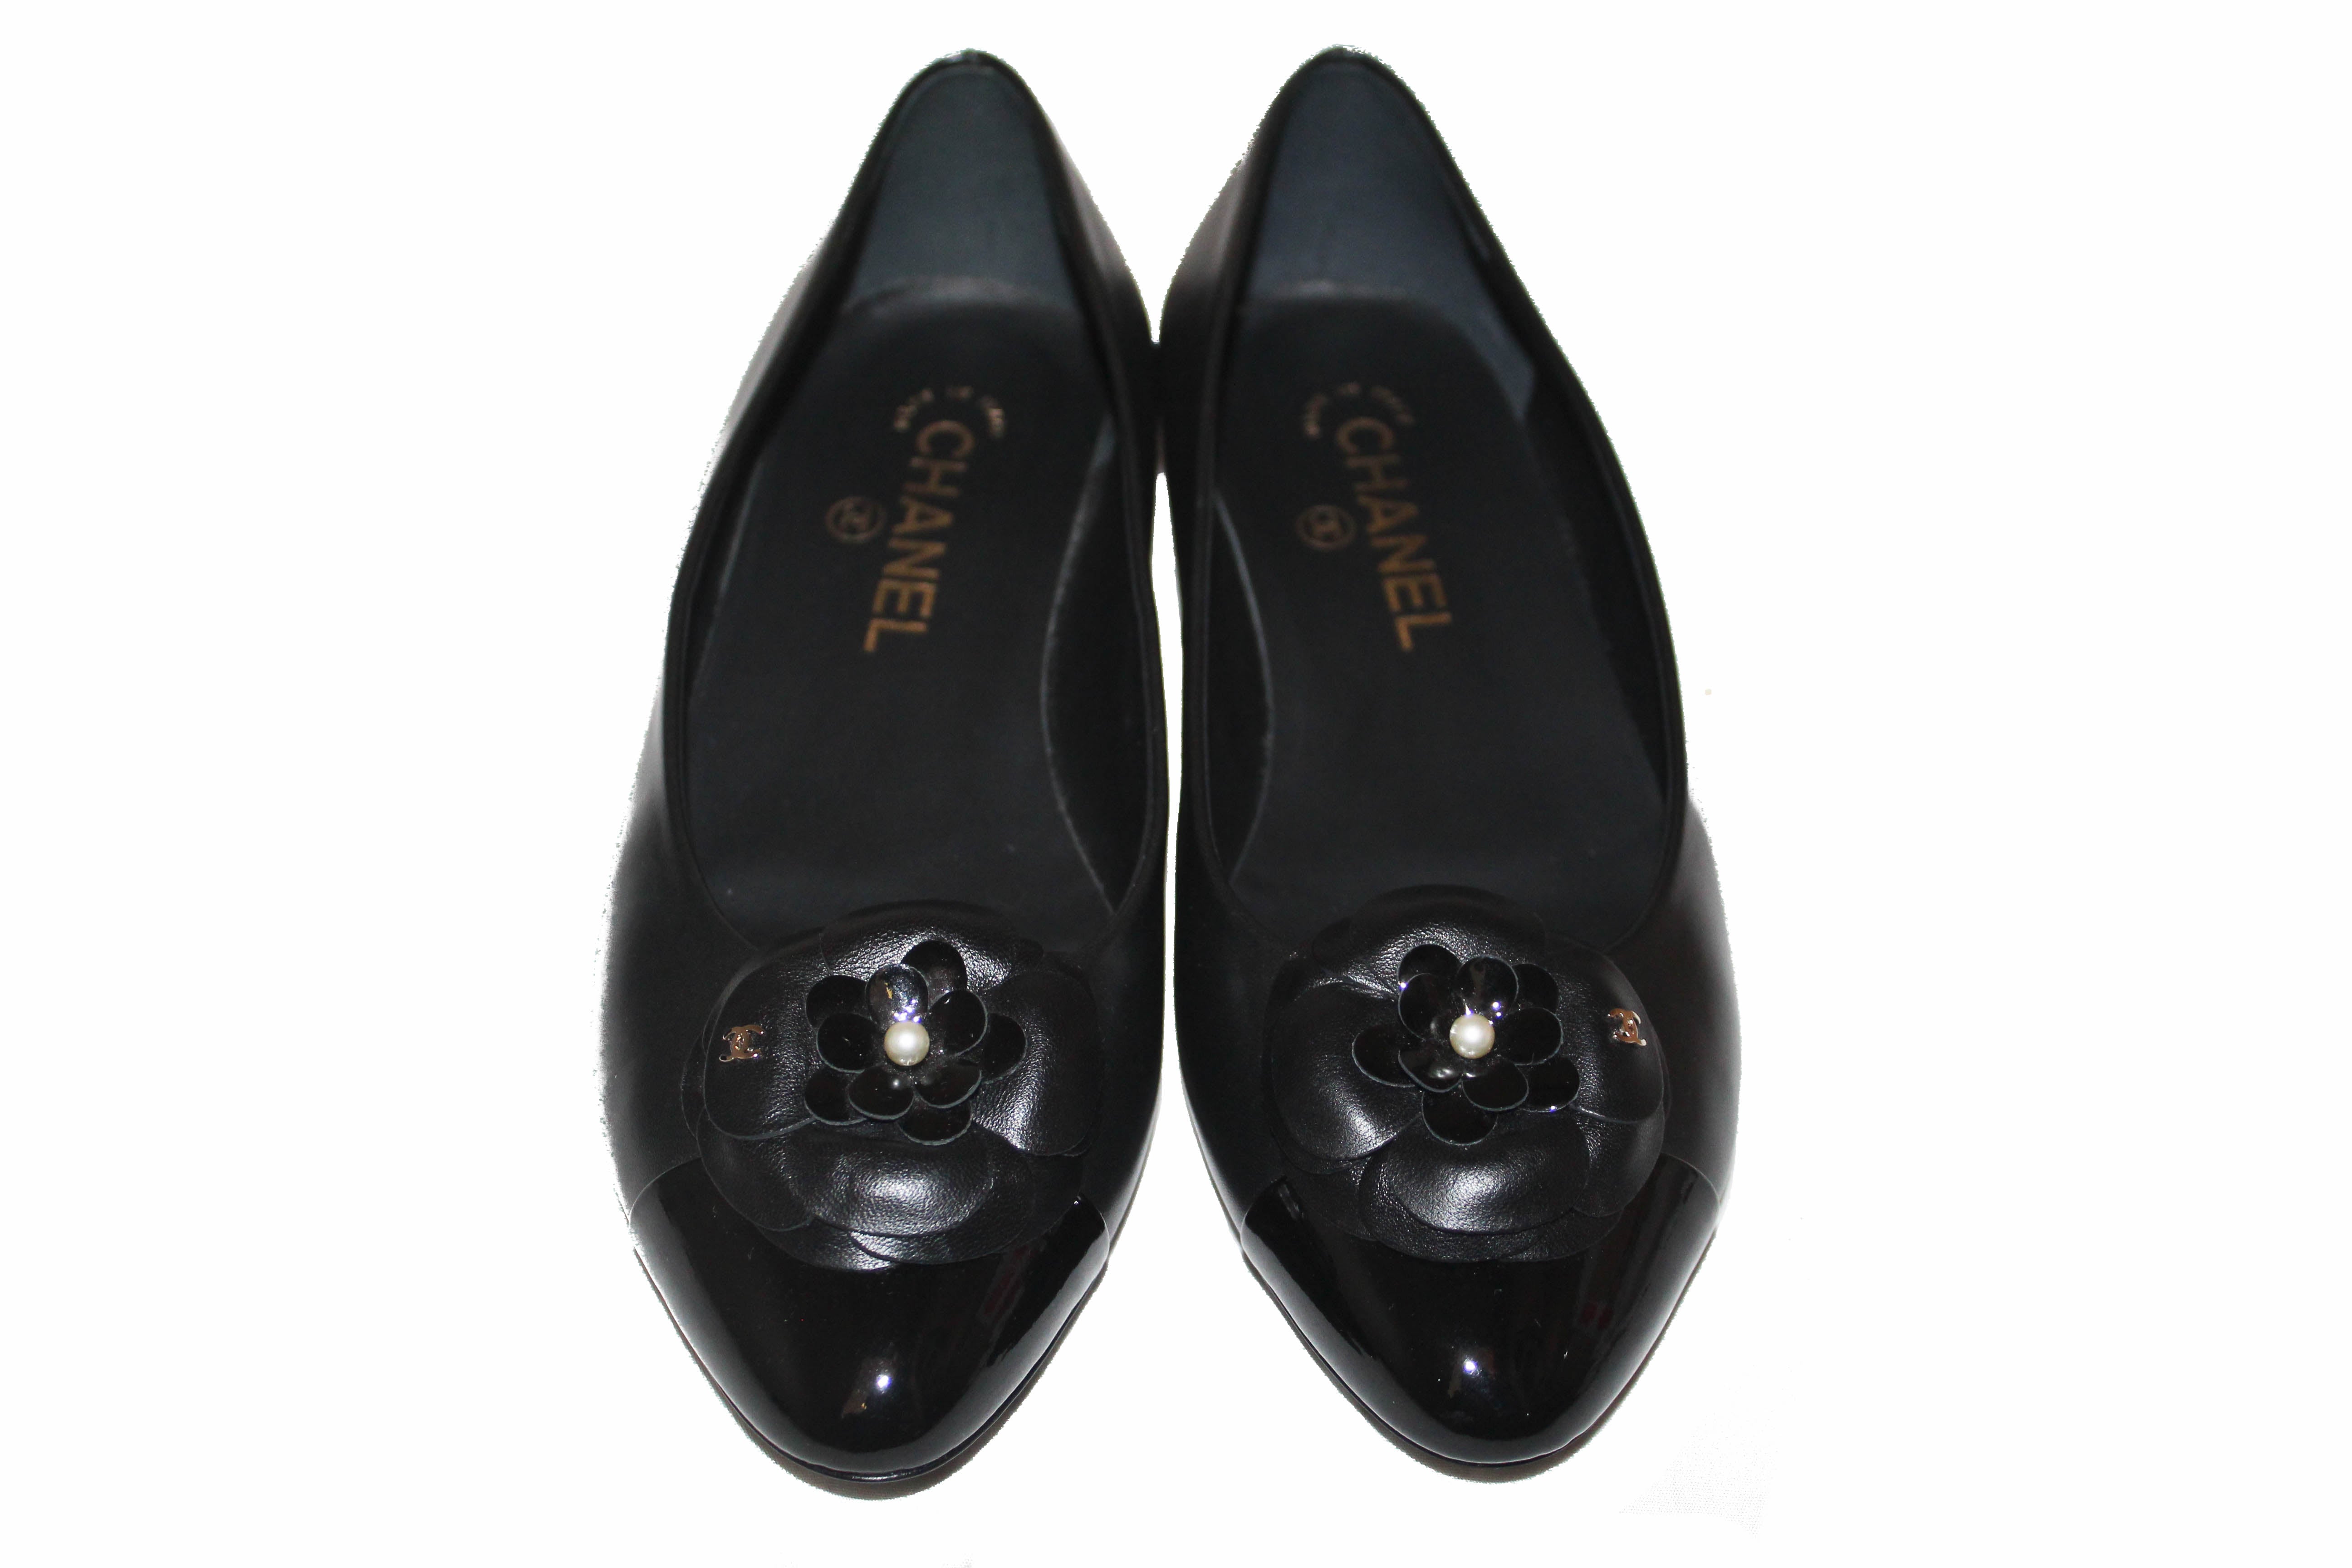 Authentic New Chanel Black Pointed Toe Camelia Flats Size 37.5